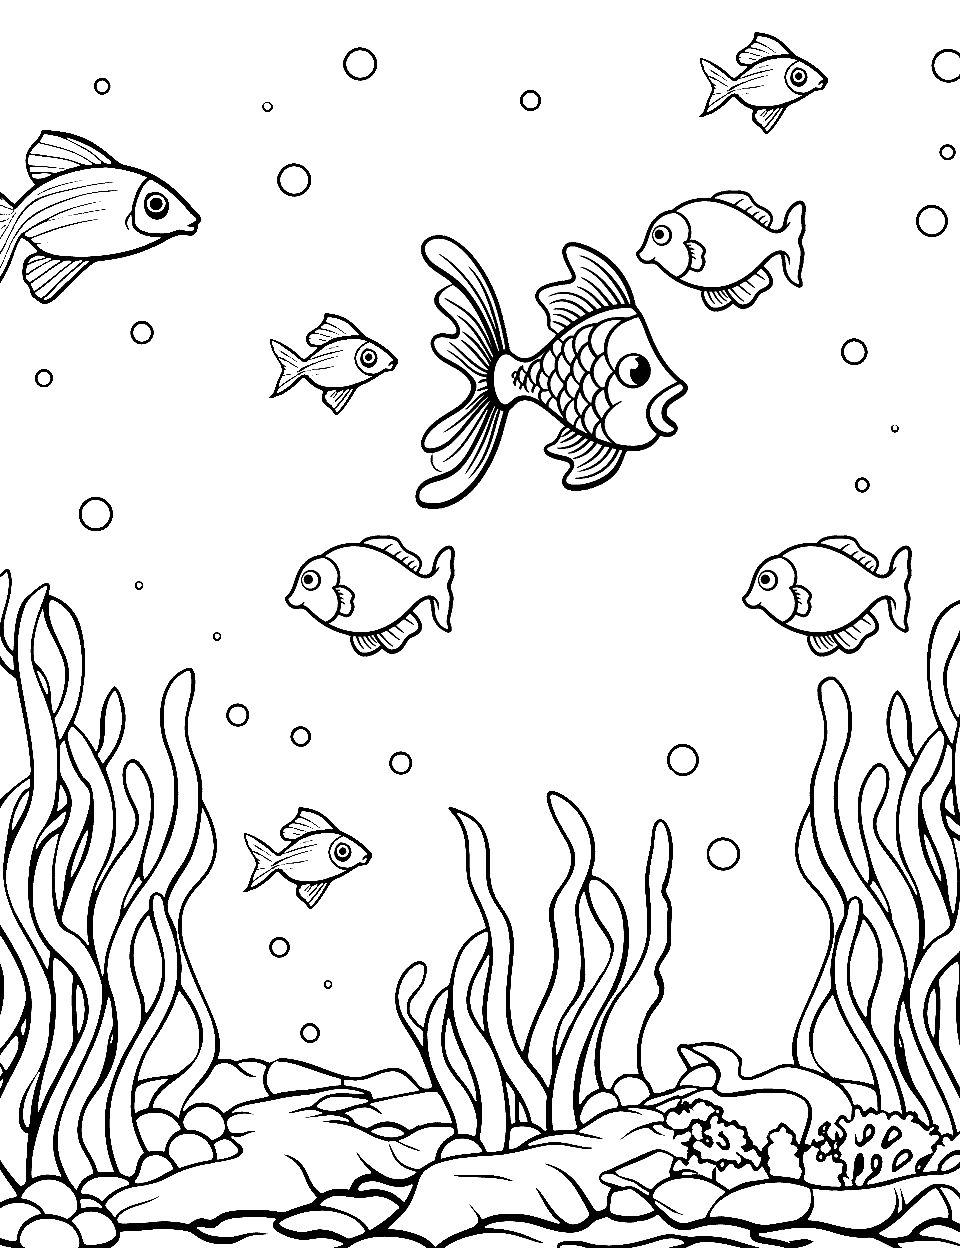 Coral Reef Under the Sea Nature Coloring Page - A coral reef with fish swimming among the corals.